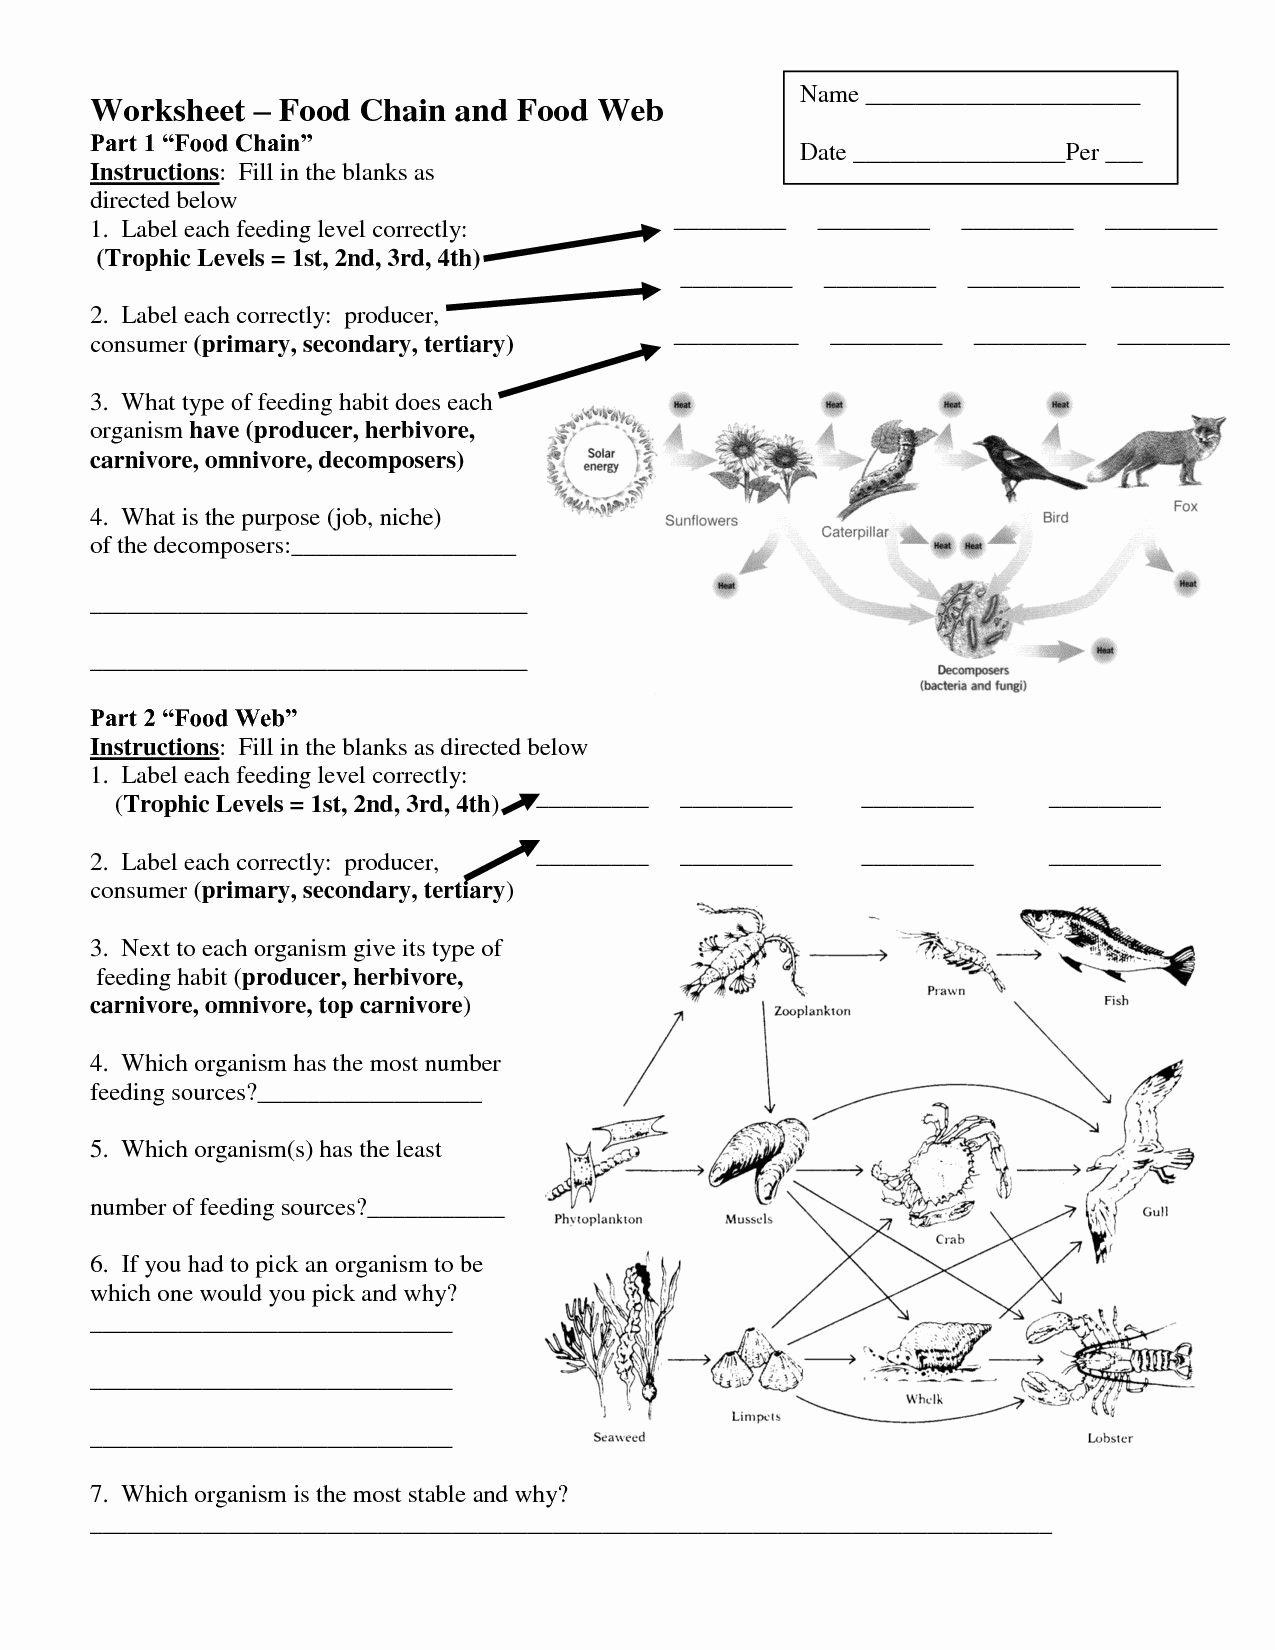 Food Chain Worksheet Answers Fresh Worksheets Food Chains and Food Webs Science